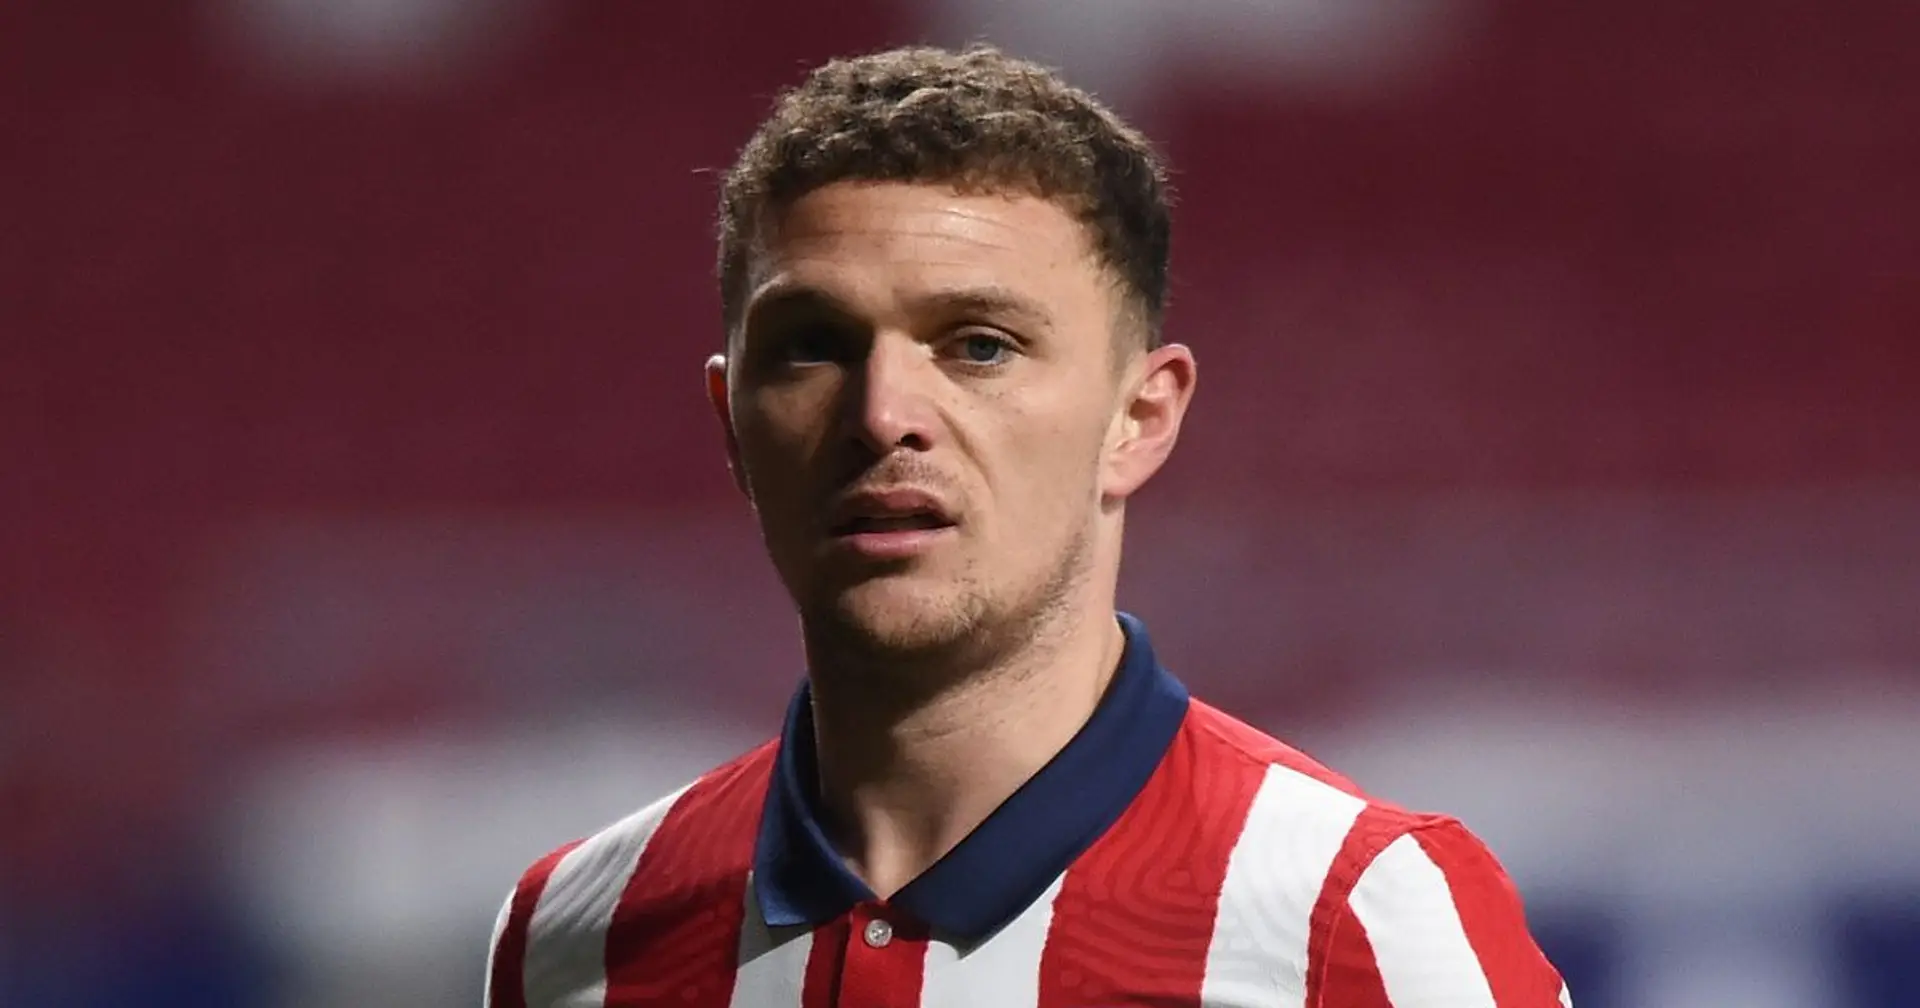 Atletico Madrid reject Man United's opening bid for Kieran Trippier, asking price revealed (reliability: 4 stars)